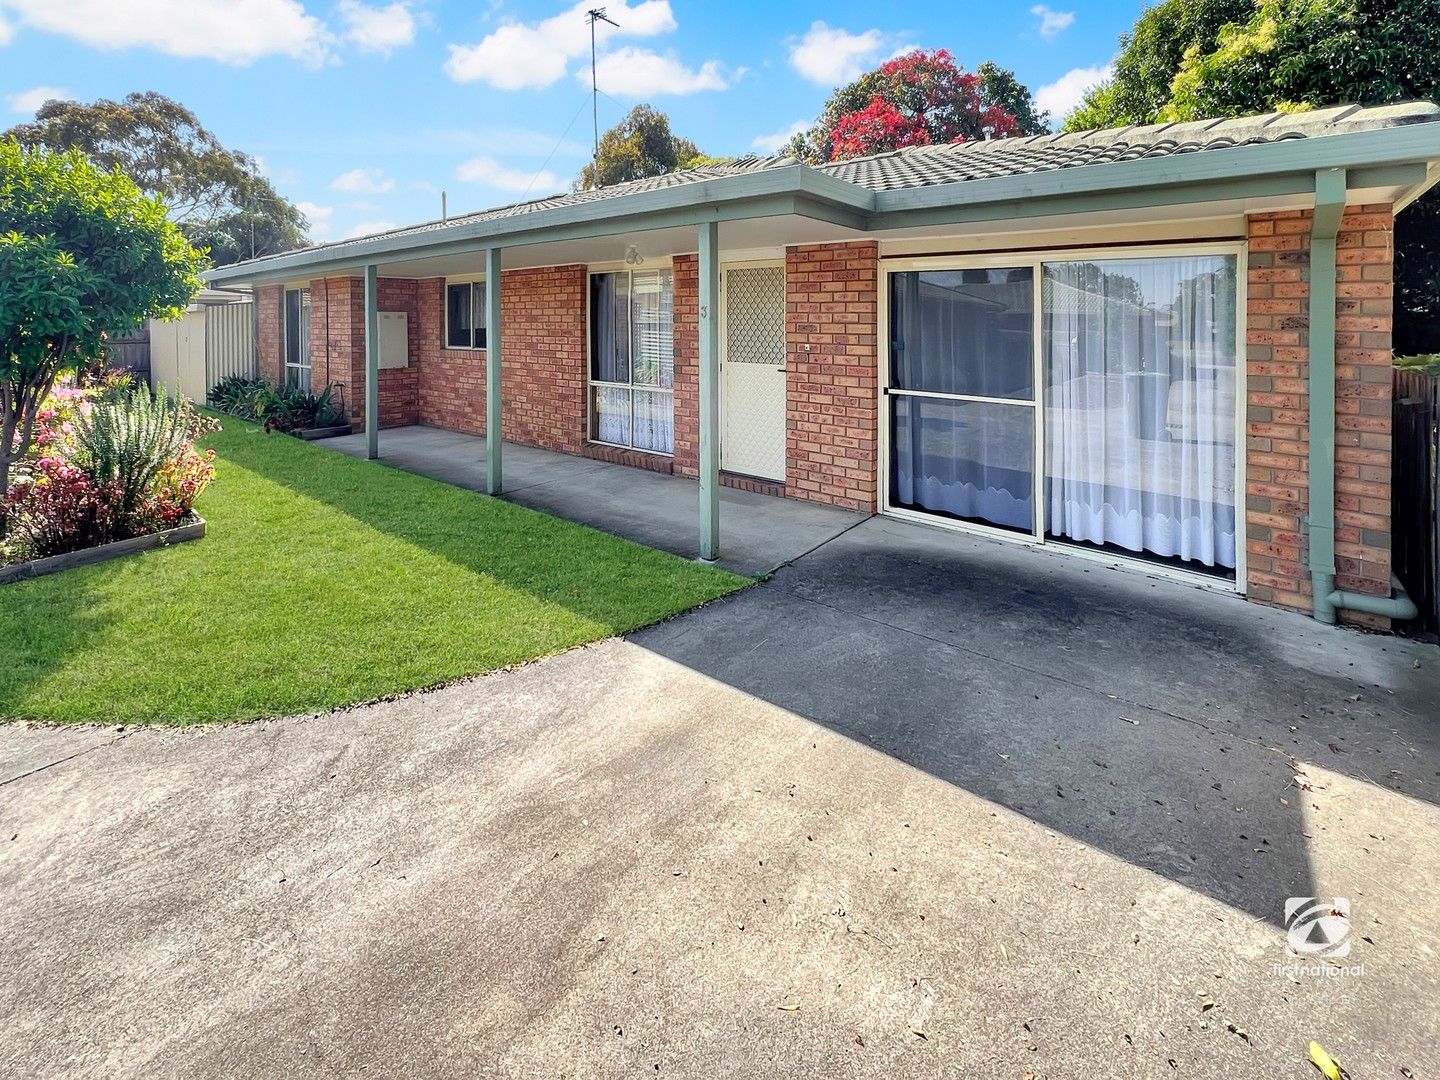 2 bedrooms Apartment / Unit / Flat in 3/22 Mitchell Street BAIRNSDALE VIC, 3875